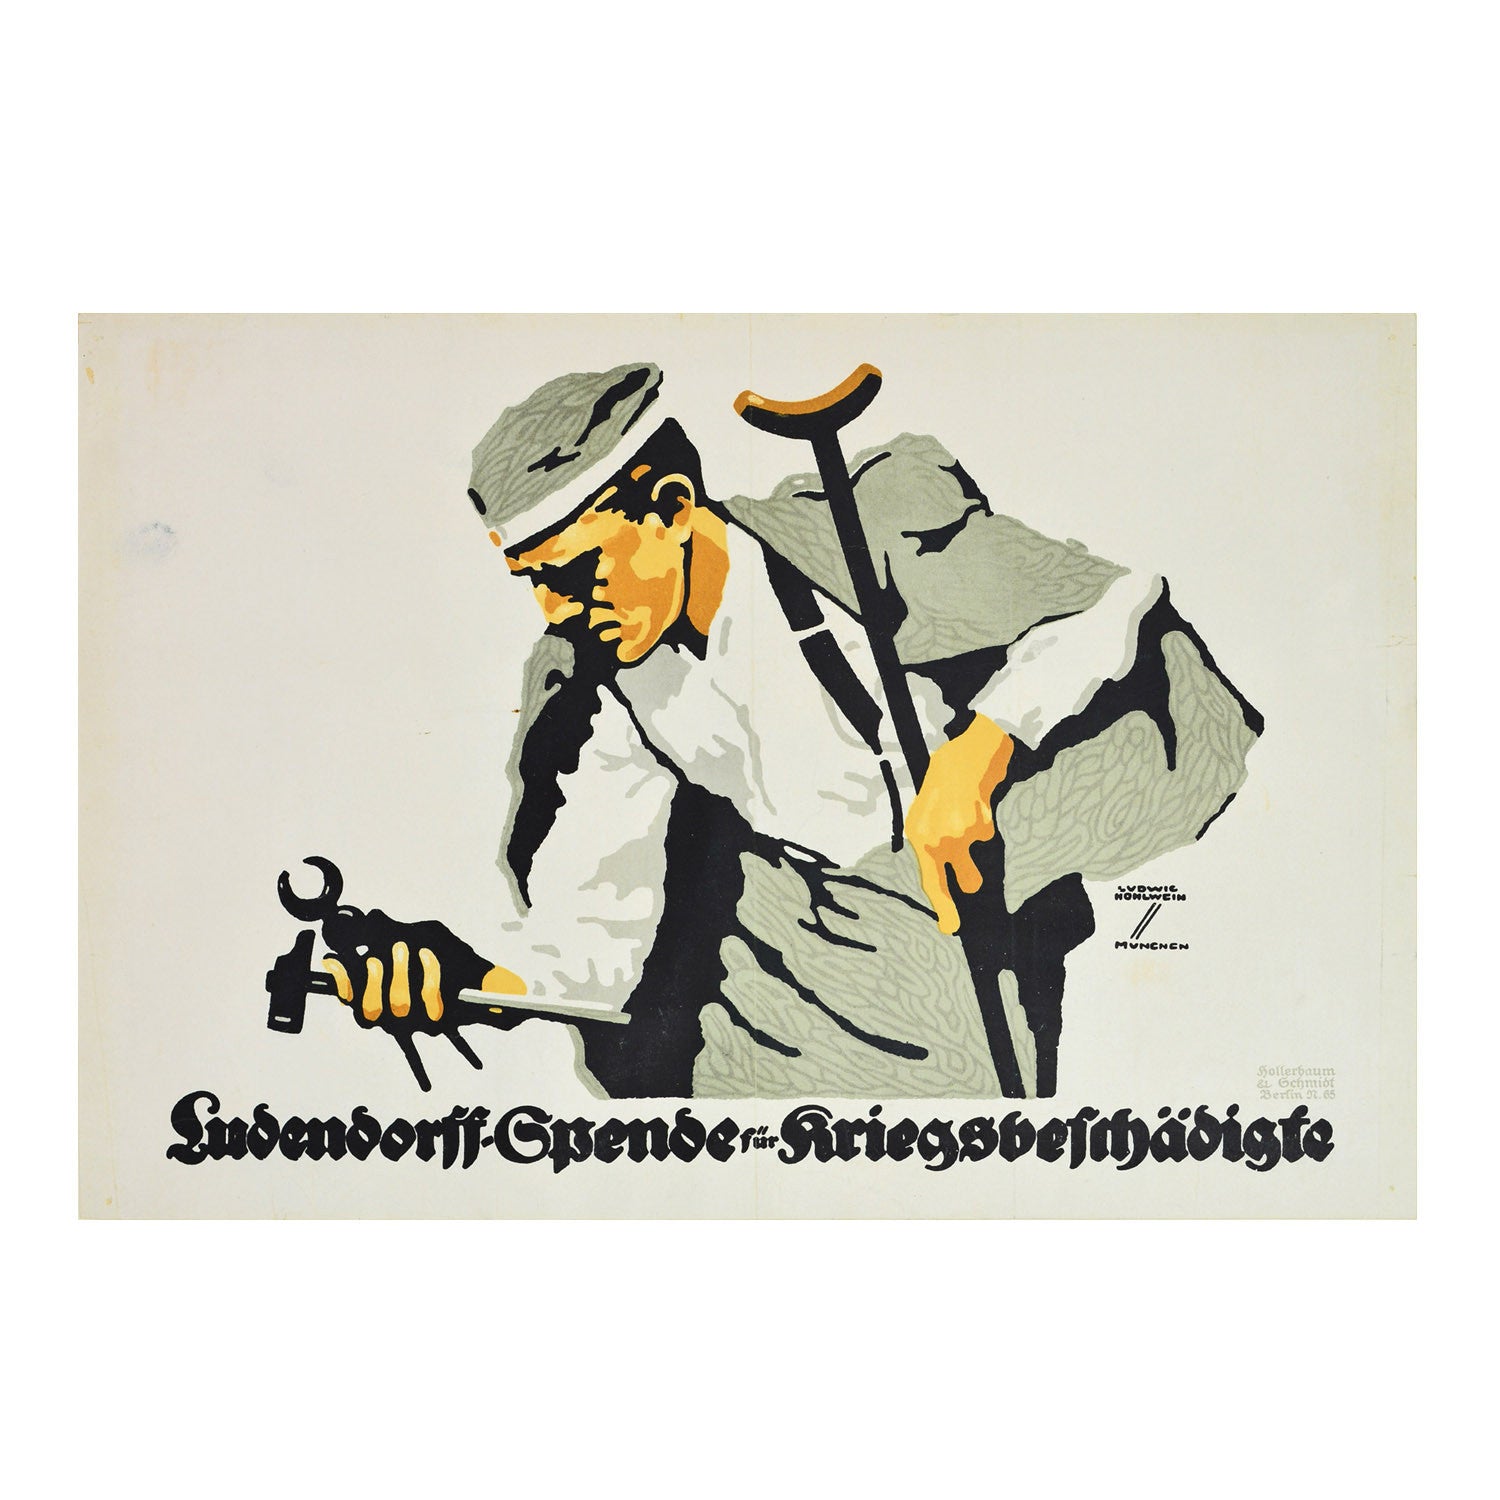 An original poster for the Ludendorff Appeal, advertising re-training to disabled soldiers, designed by Ludwig Hohlwein in 1918. The image shows a wounded soldier holding tools.